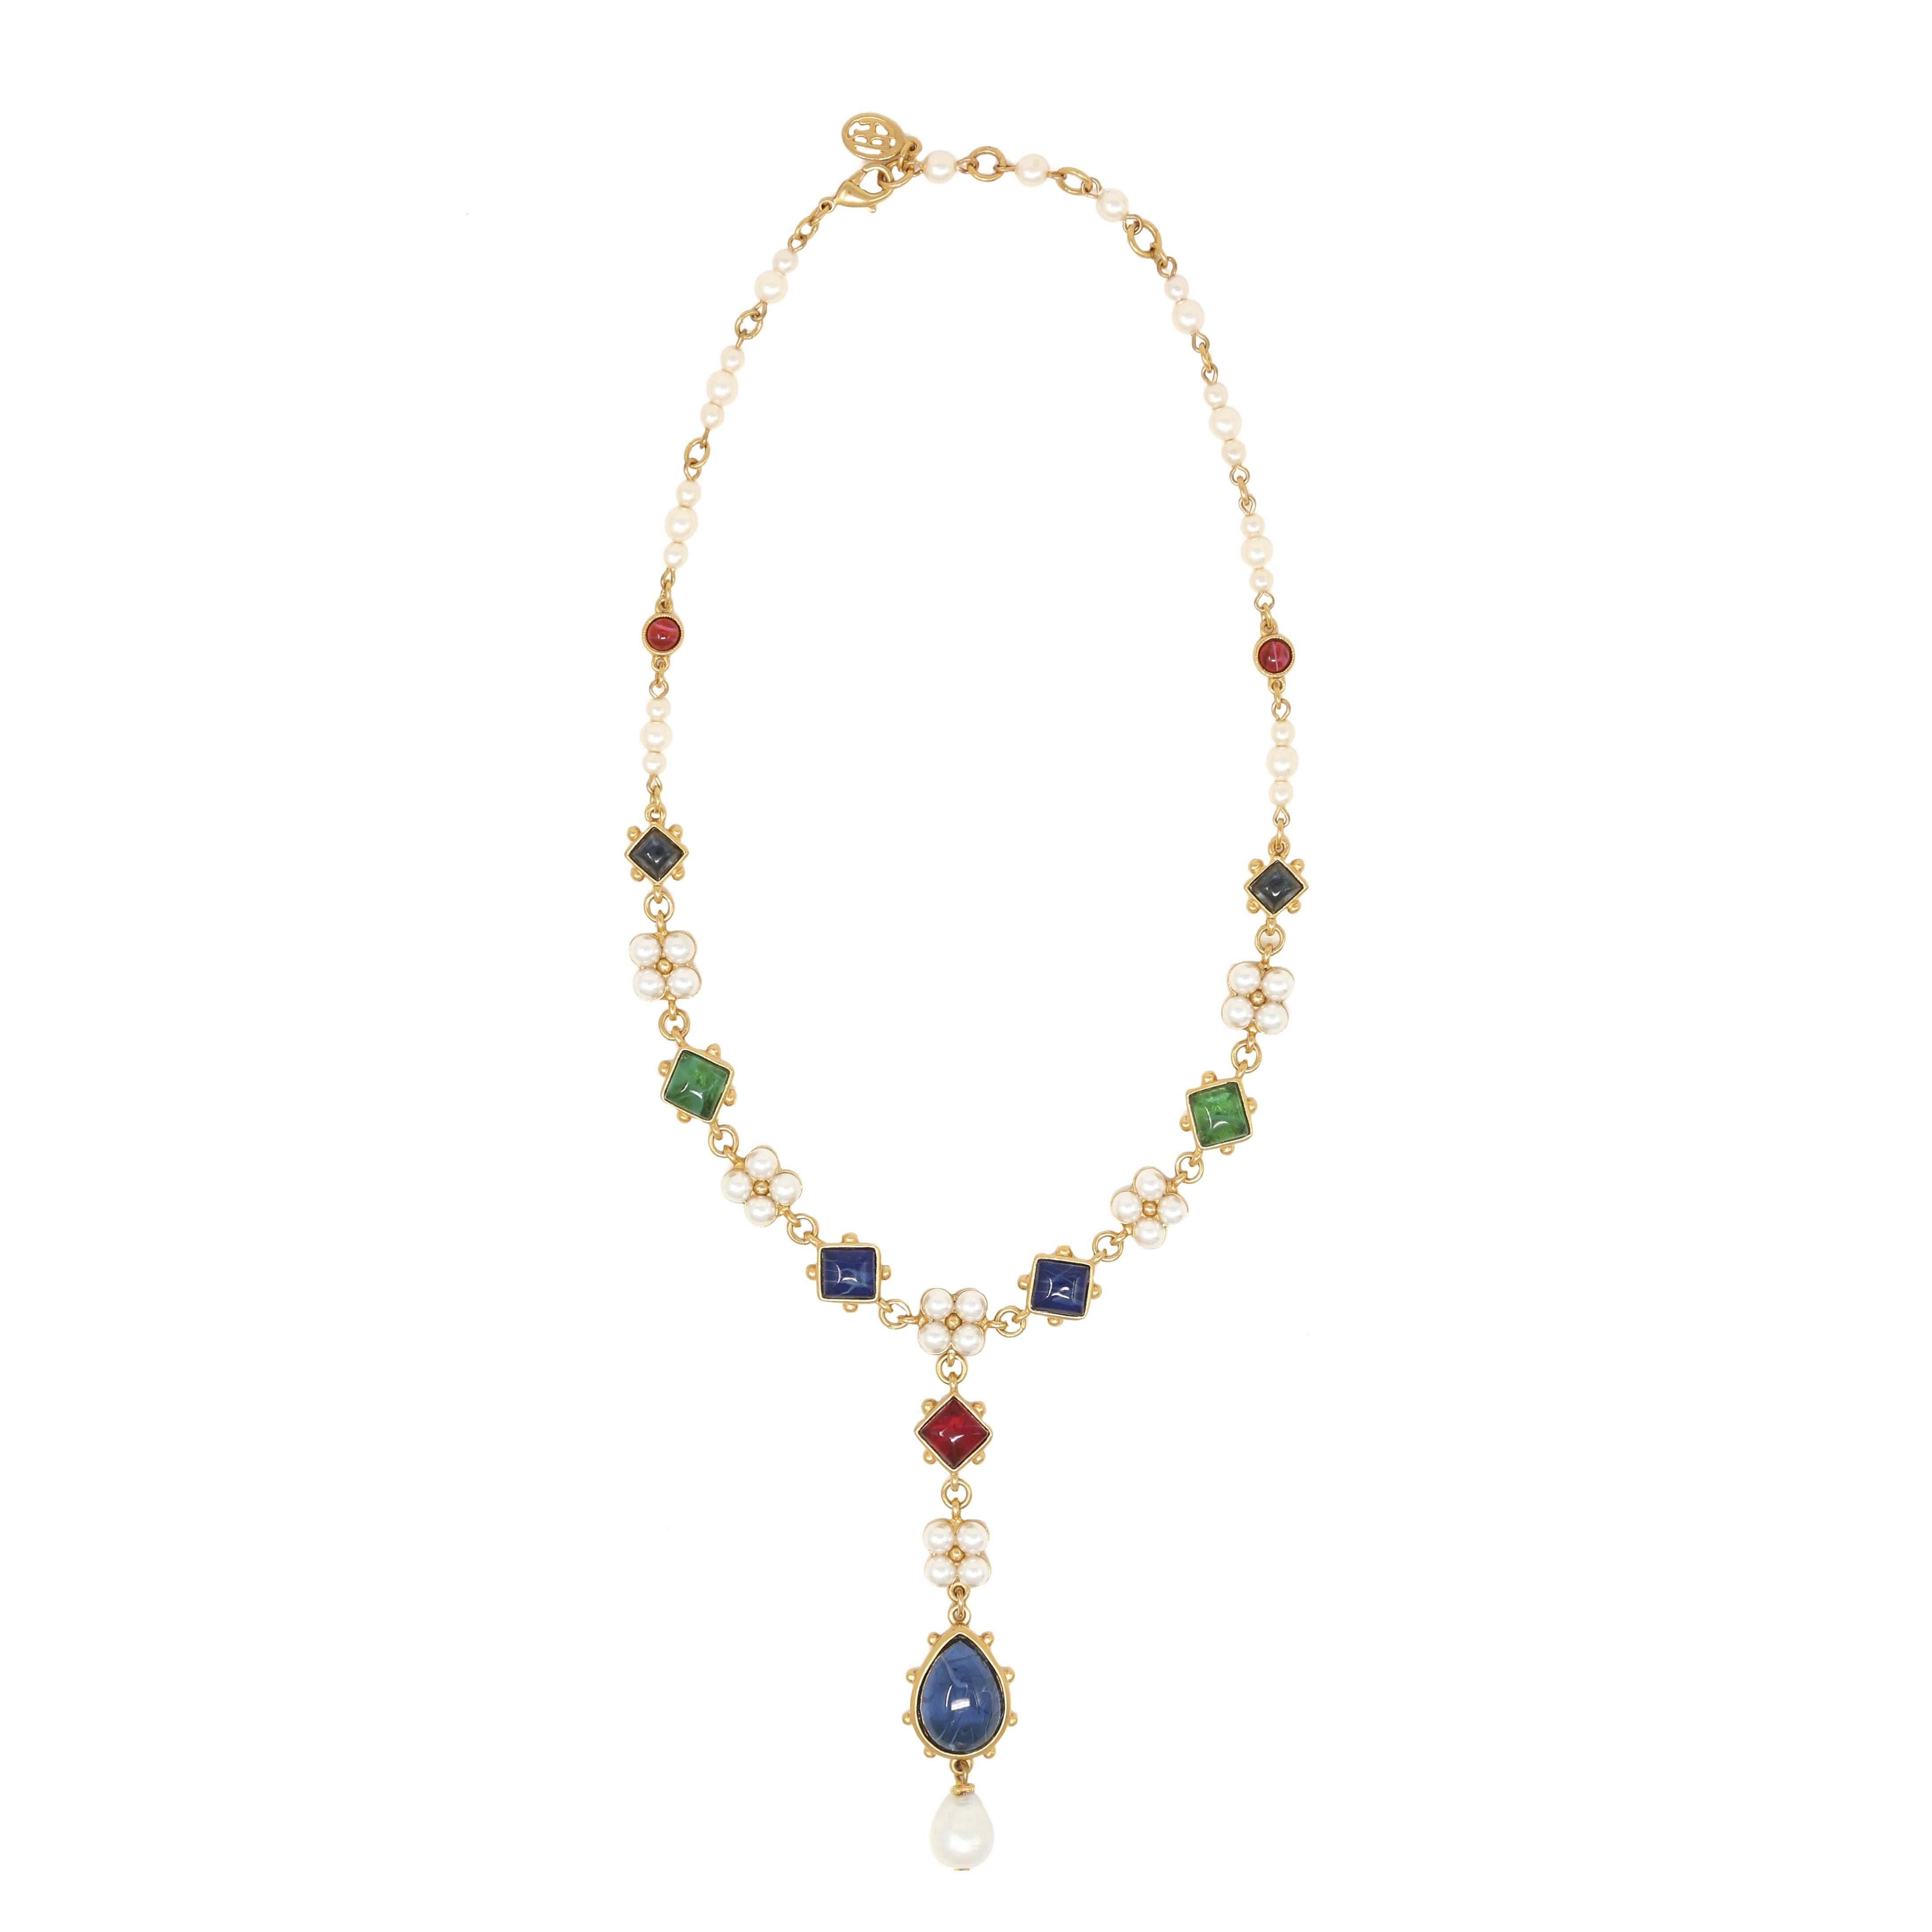 Cavill Pearl + Colored Stone Necklace | Ben-Amun Jewelry